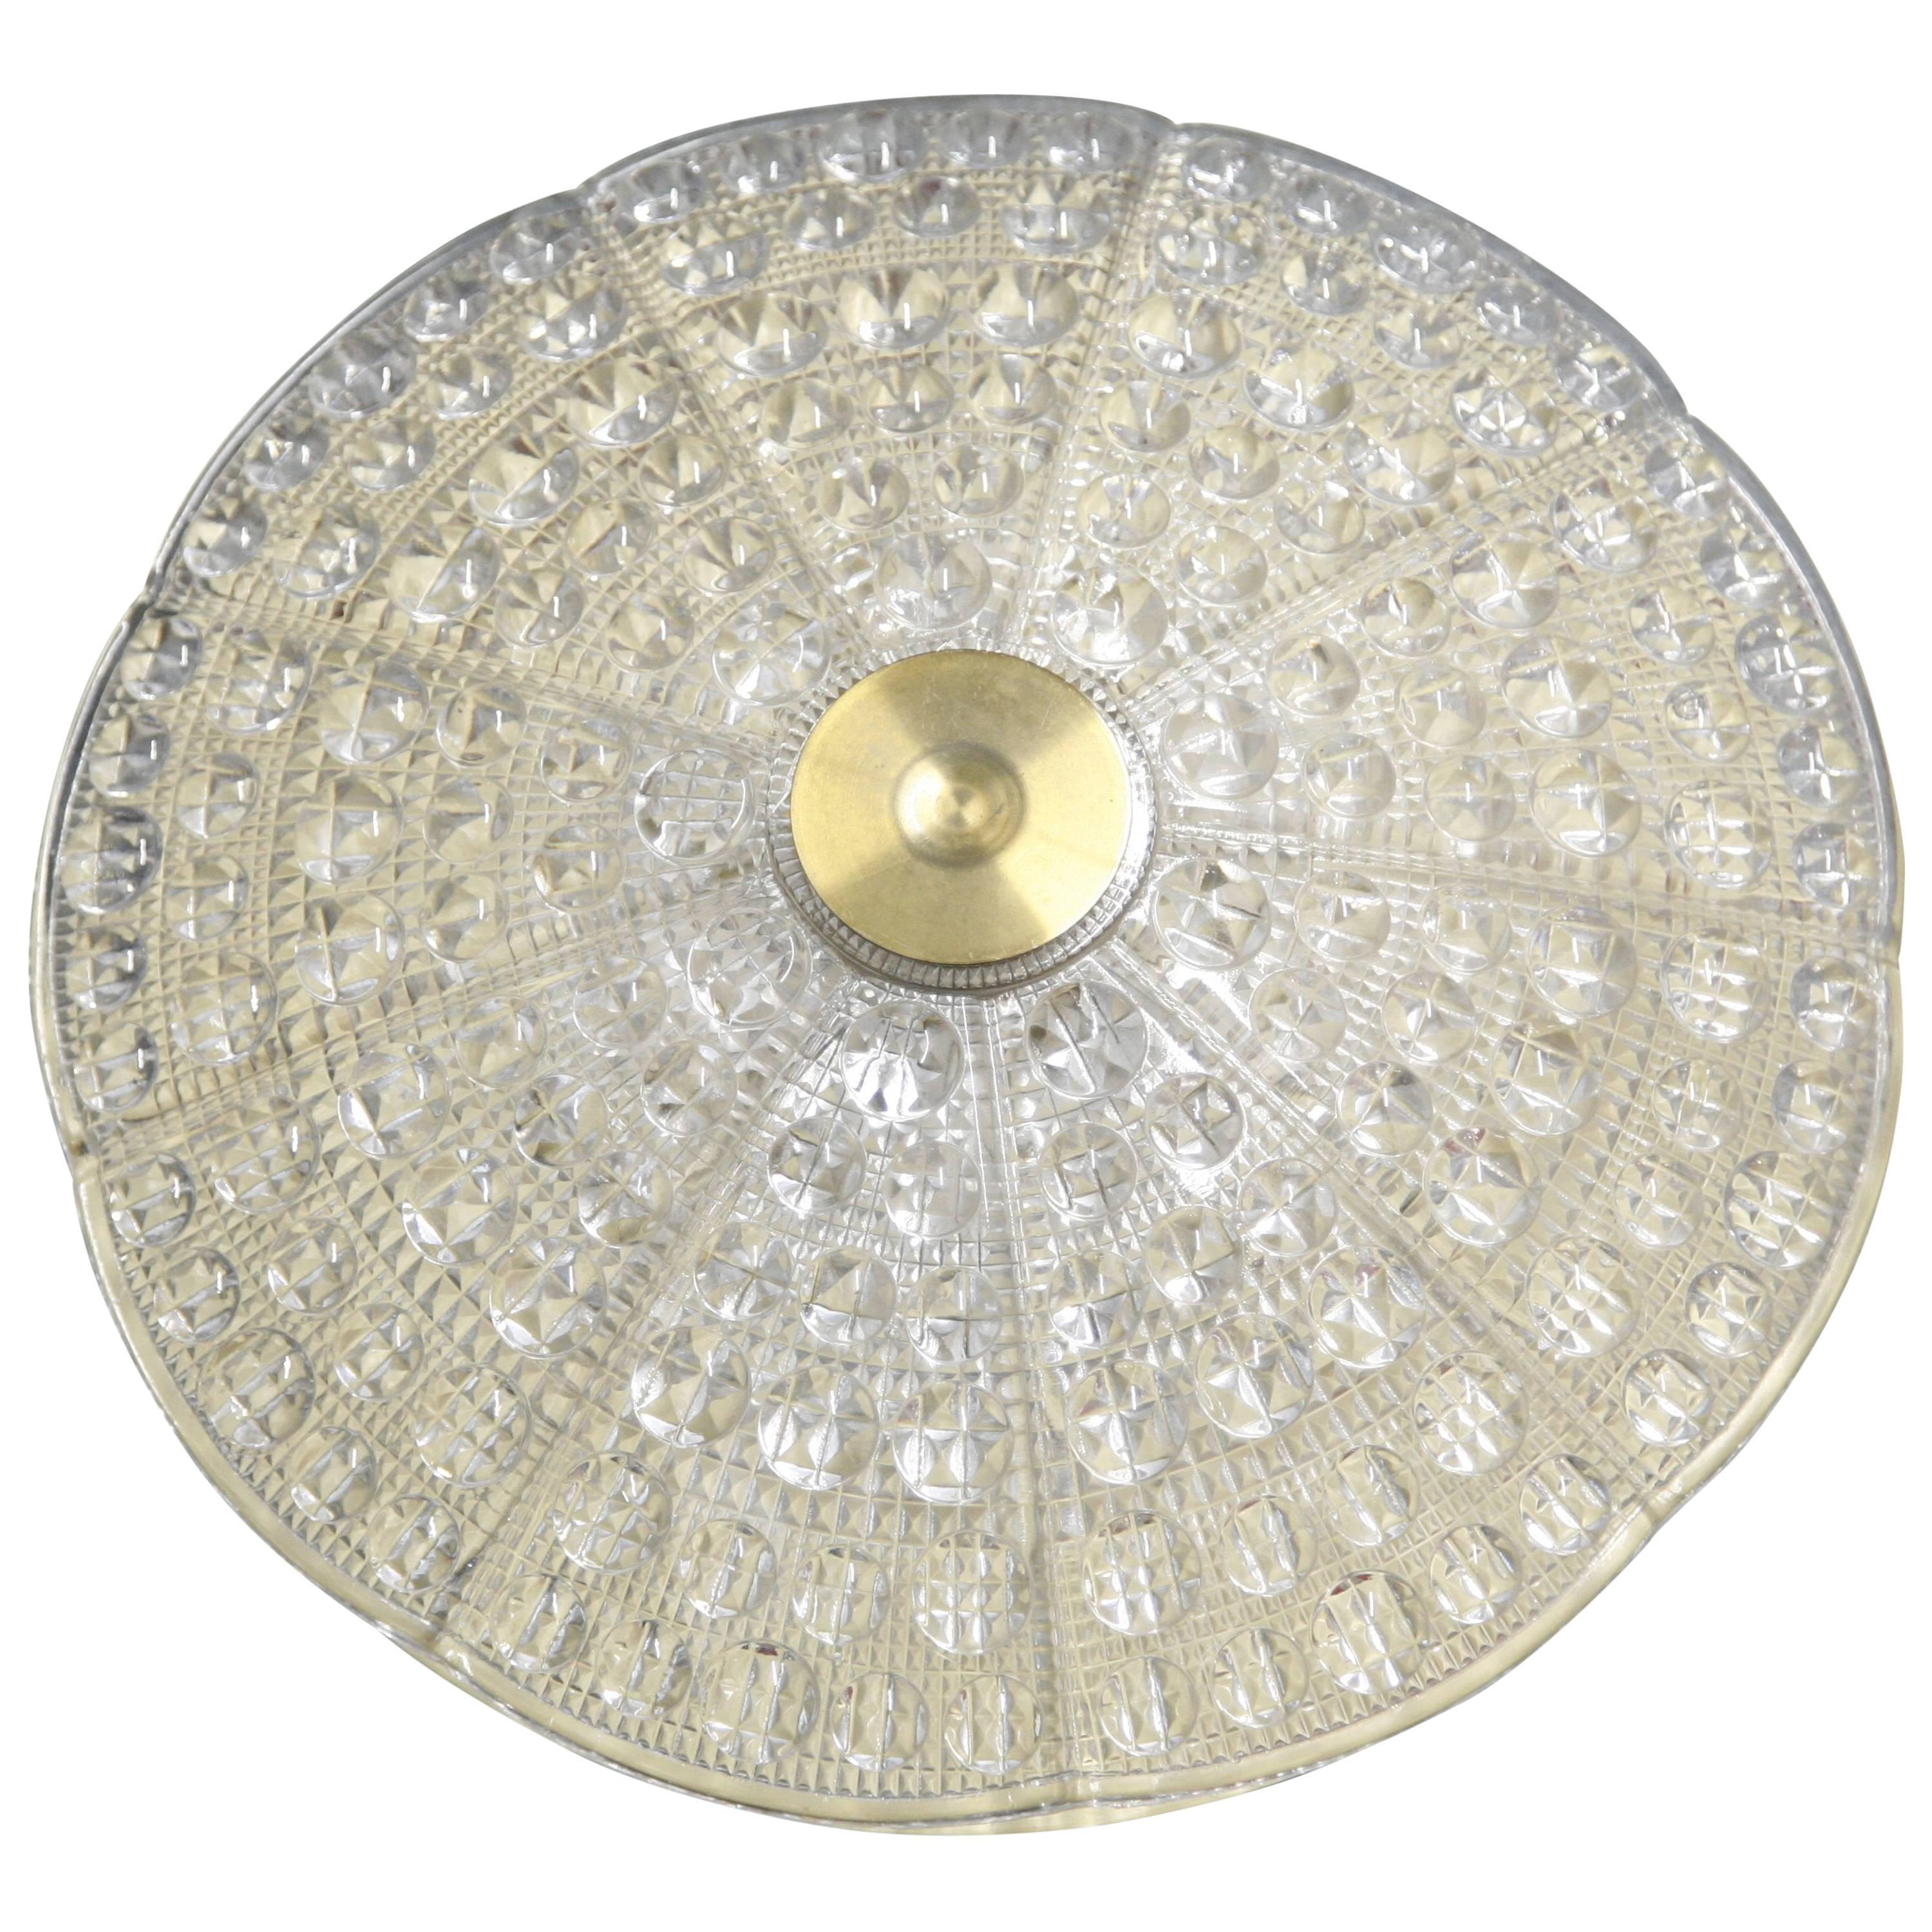 Orrefors Flushmount, crystal diffuser on a brass frame, 1960, Sweden in all vintage condition with five European candelabra sockets on a brass frame.
The shade is a thick domed cast crystal with a smooth surface with bubble structure designed by